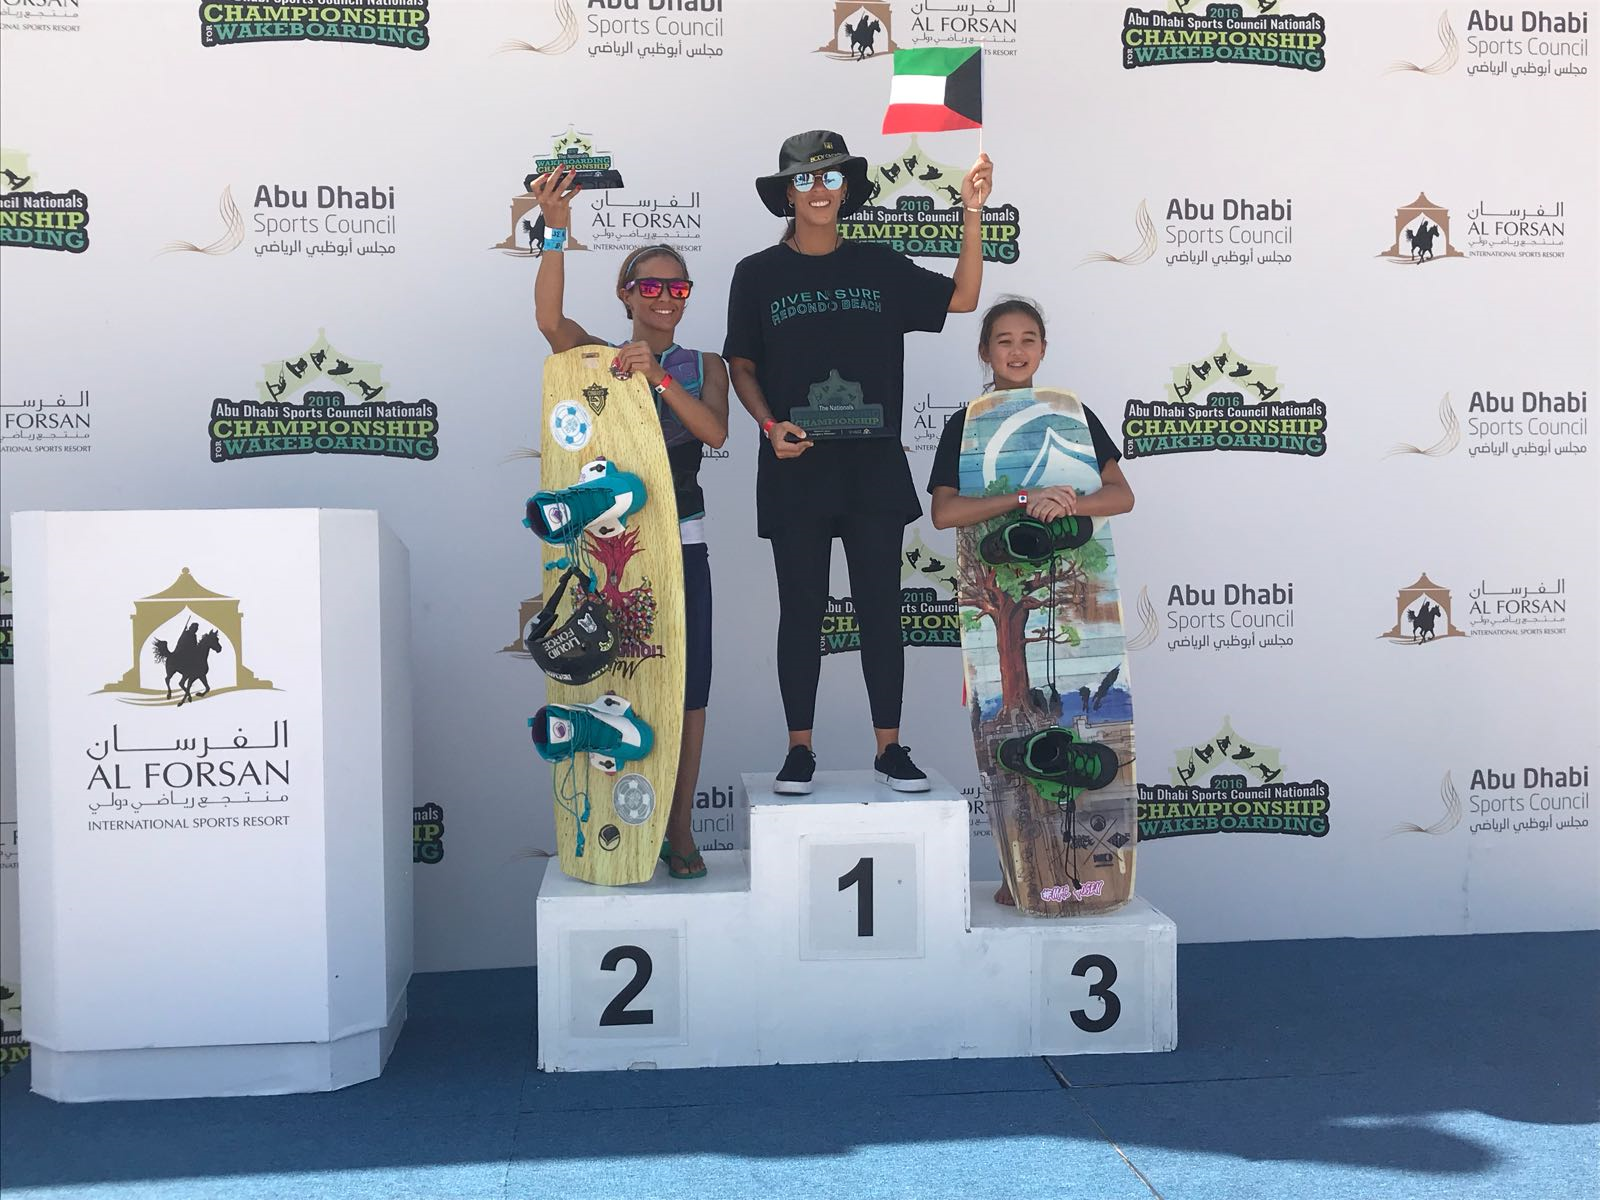 Queen of Wake Abu Dhabi National Championship (2017) .. Gold medal